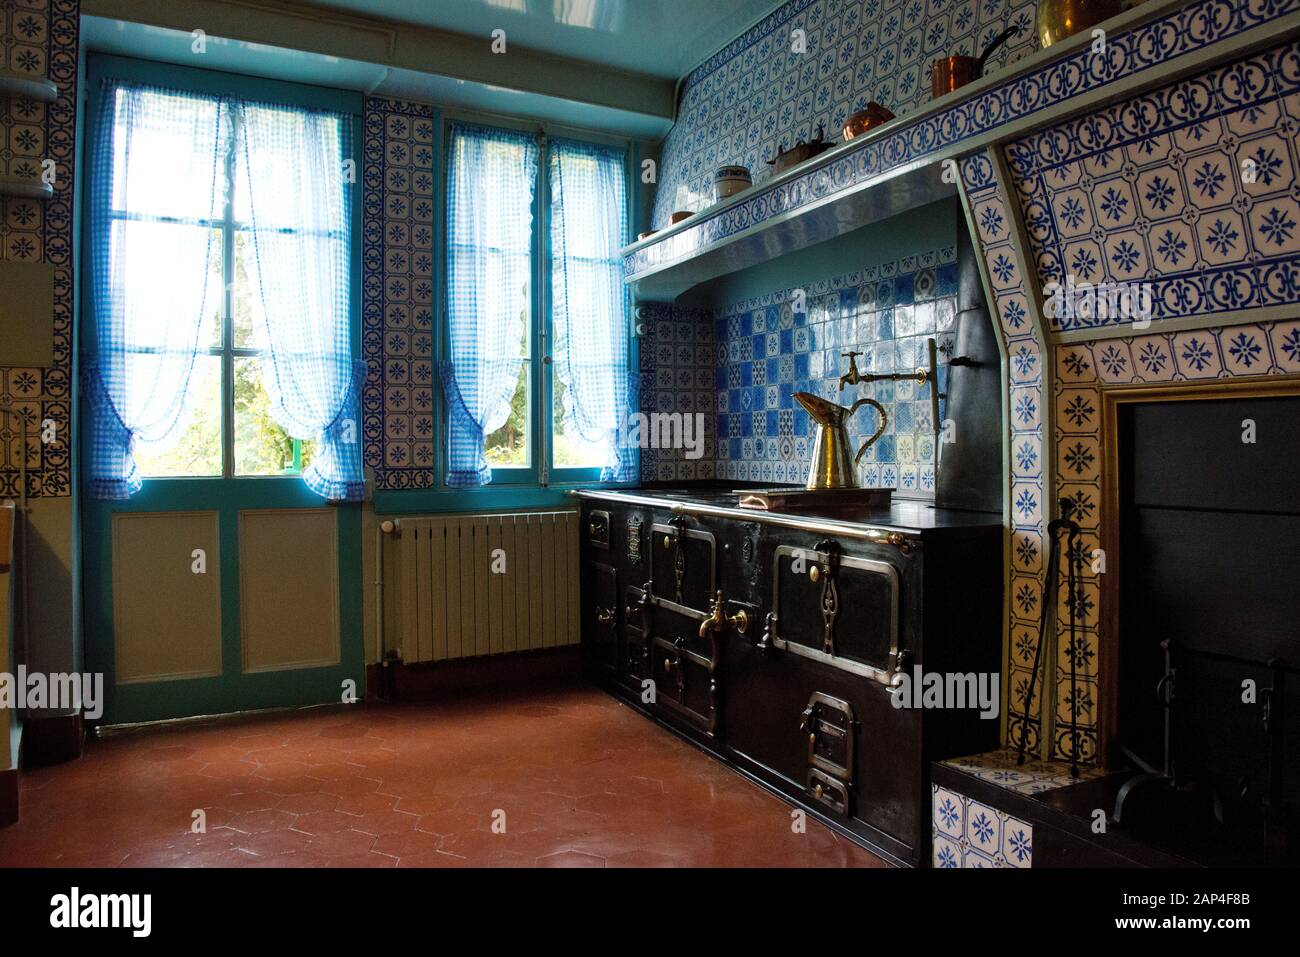 Claude Monet House Giverny Normandy France. Kitchen  area of House 84 Rue Claude Monet Giverny.  Monet House sowing cooking range Stock Photo